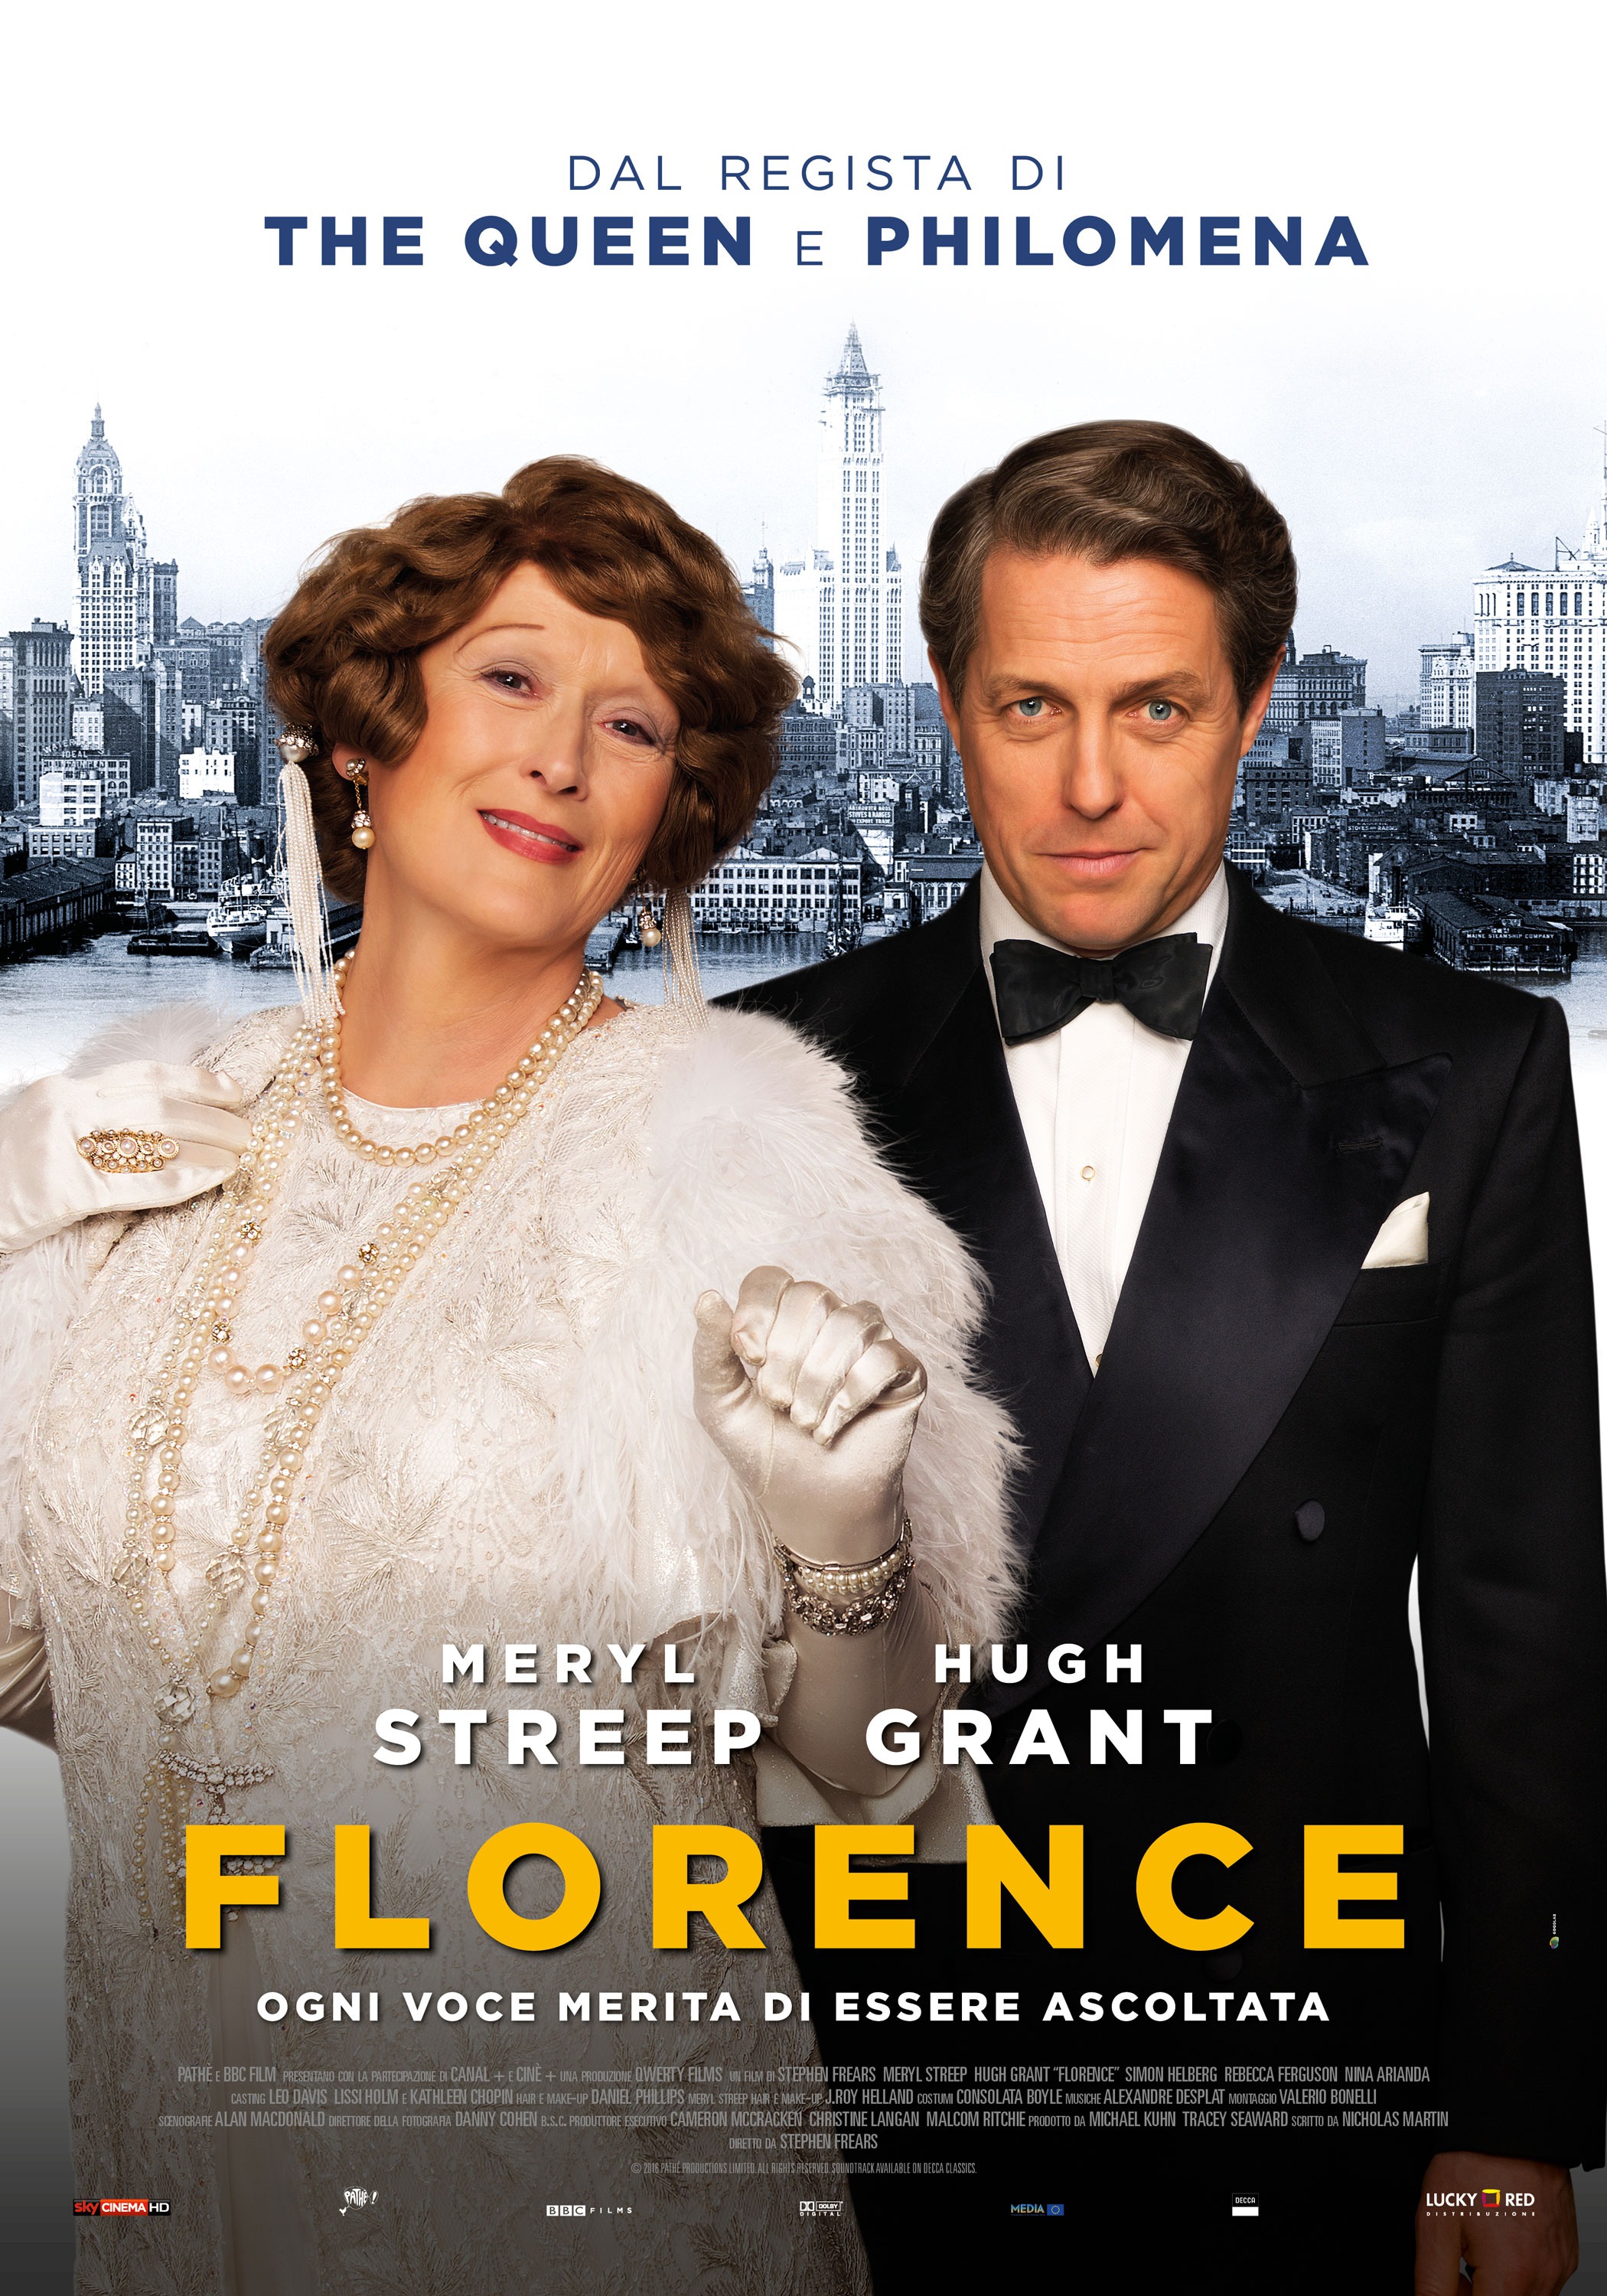 Mega Sized Movie Poster Image for Florence Foster Jenkins (#6 of 6)